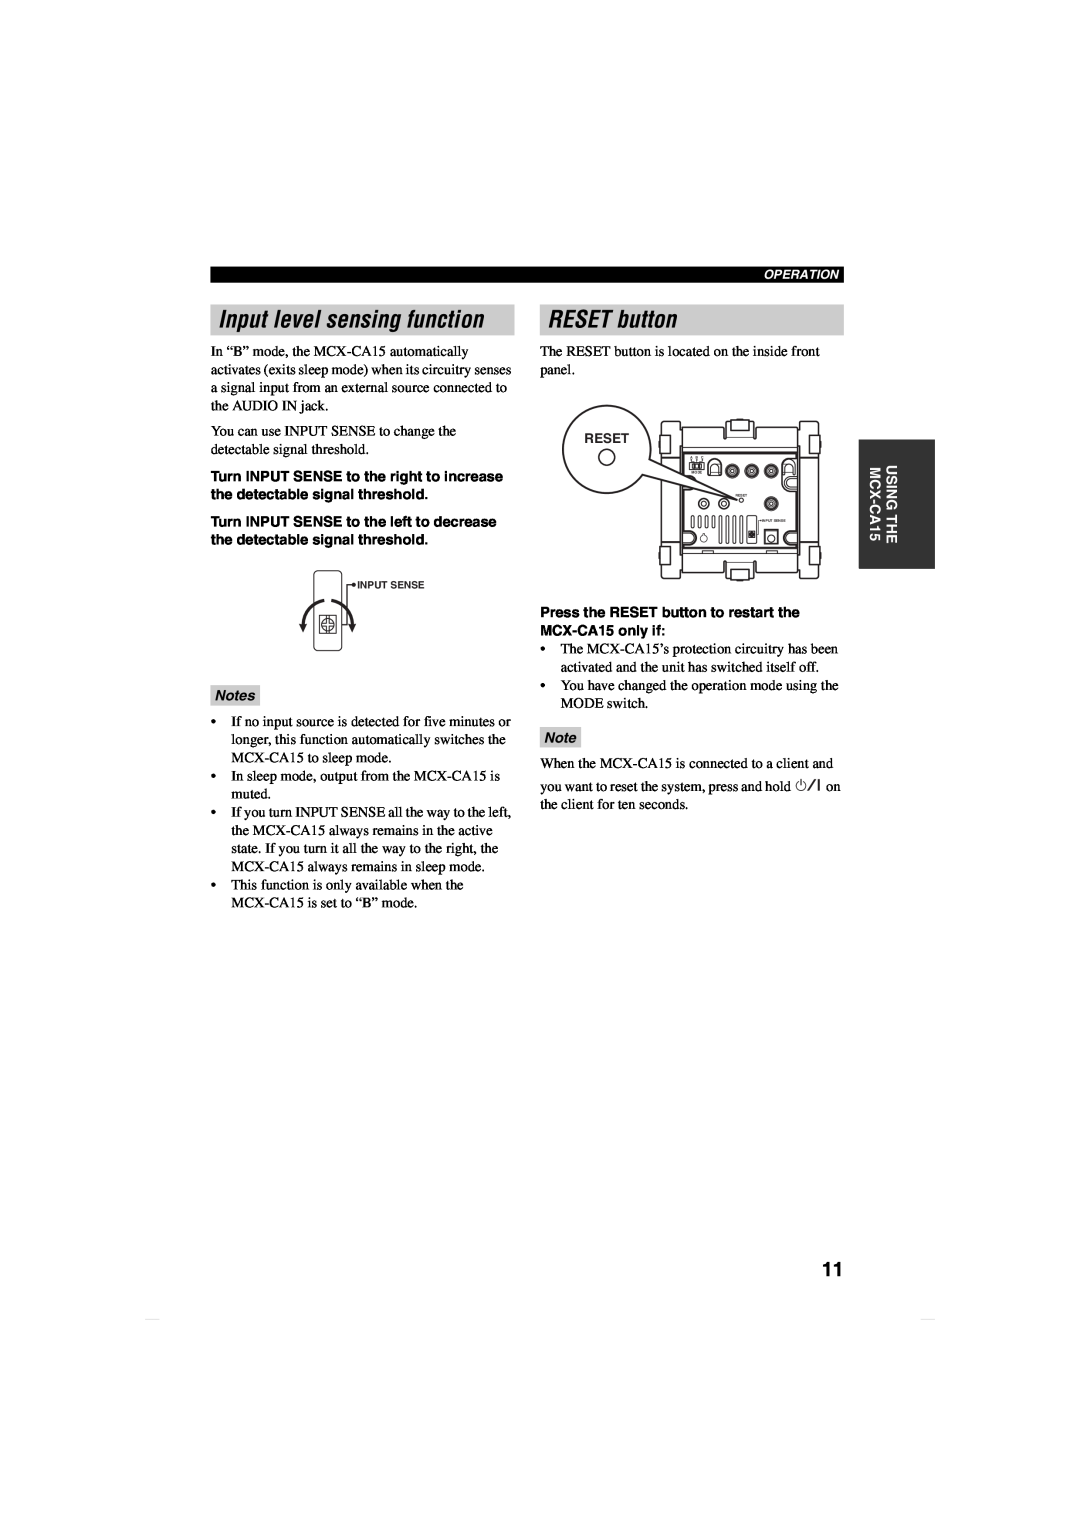 Yamaha owner manual Input level sensing function, RESET button, USING THE MCX-CA15 